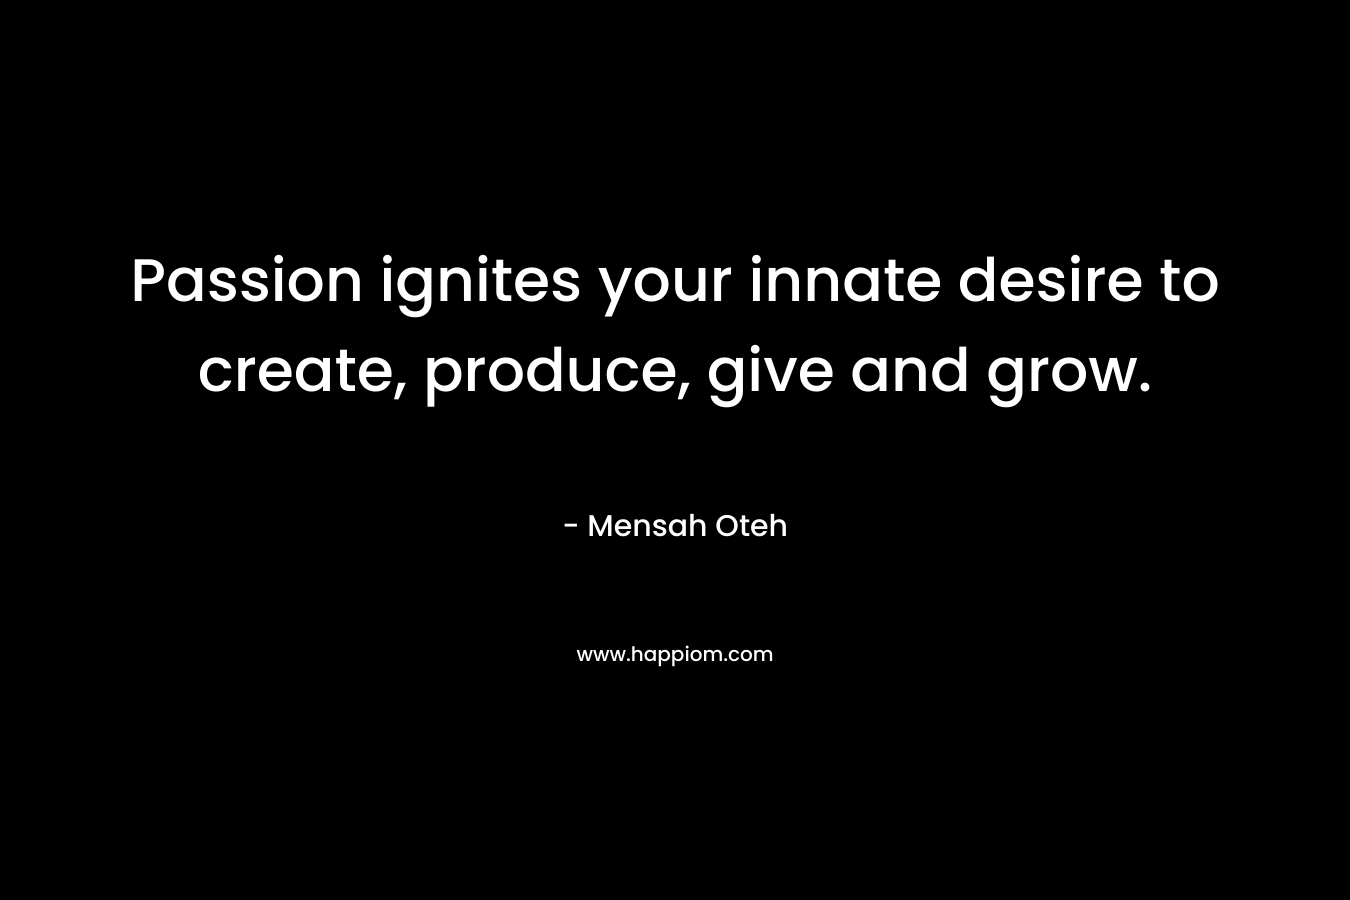 Passion ignites your innate desire to create, produce, give and grow. – Mensah Oteh